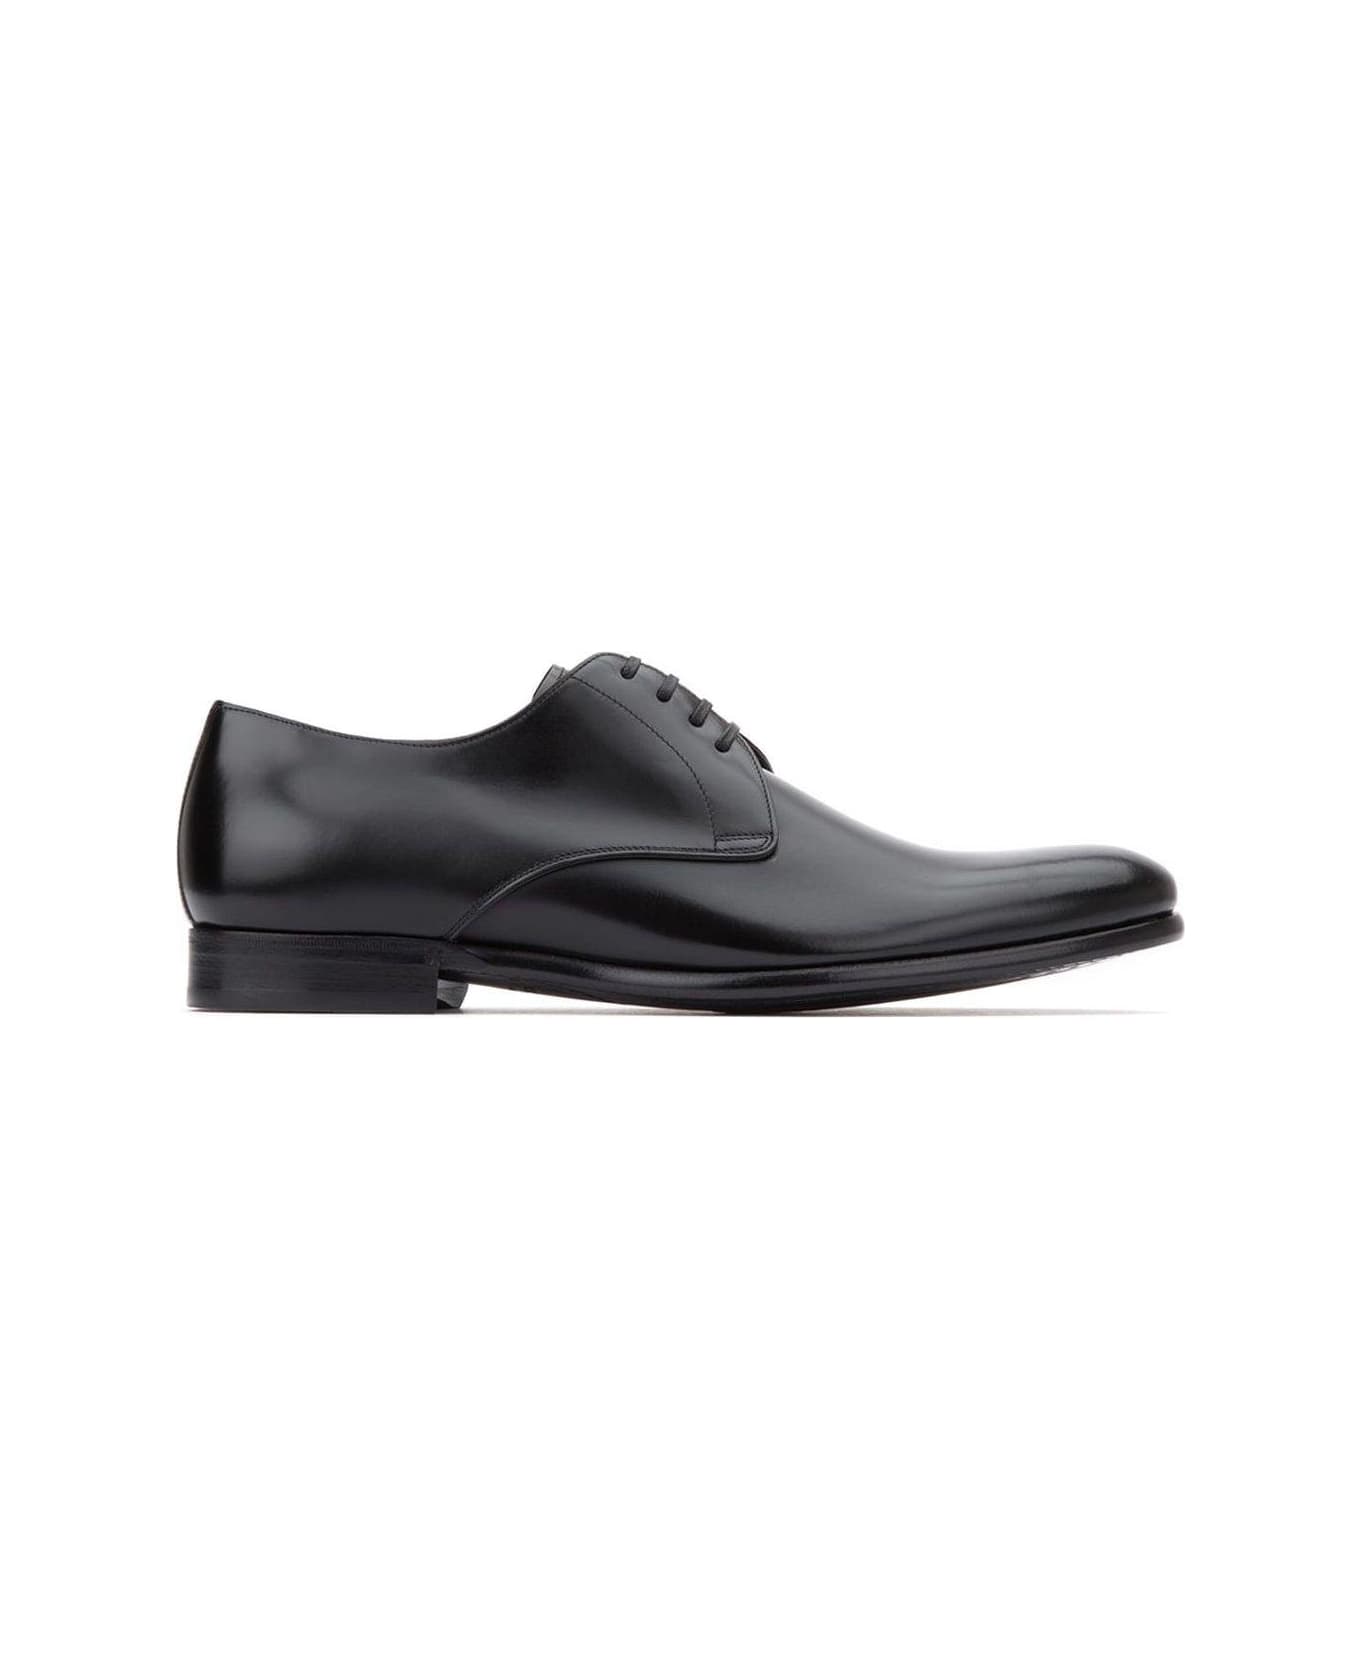 Dolce & Gabbana Lace-up Derby Shoes - Black ローファー＆デッキシューズ